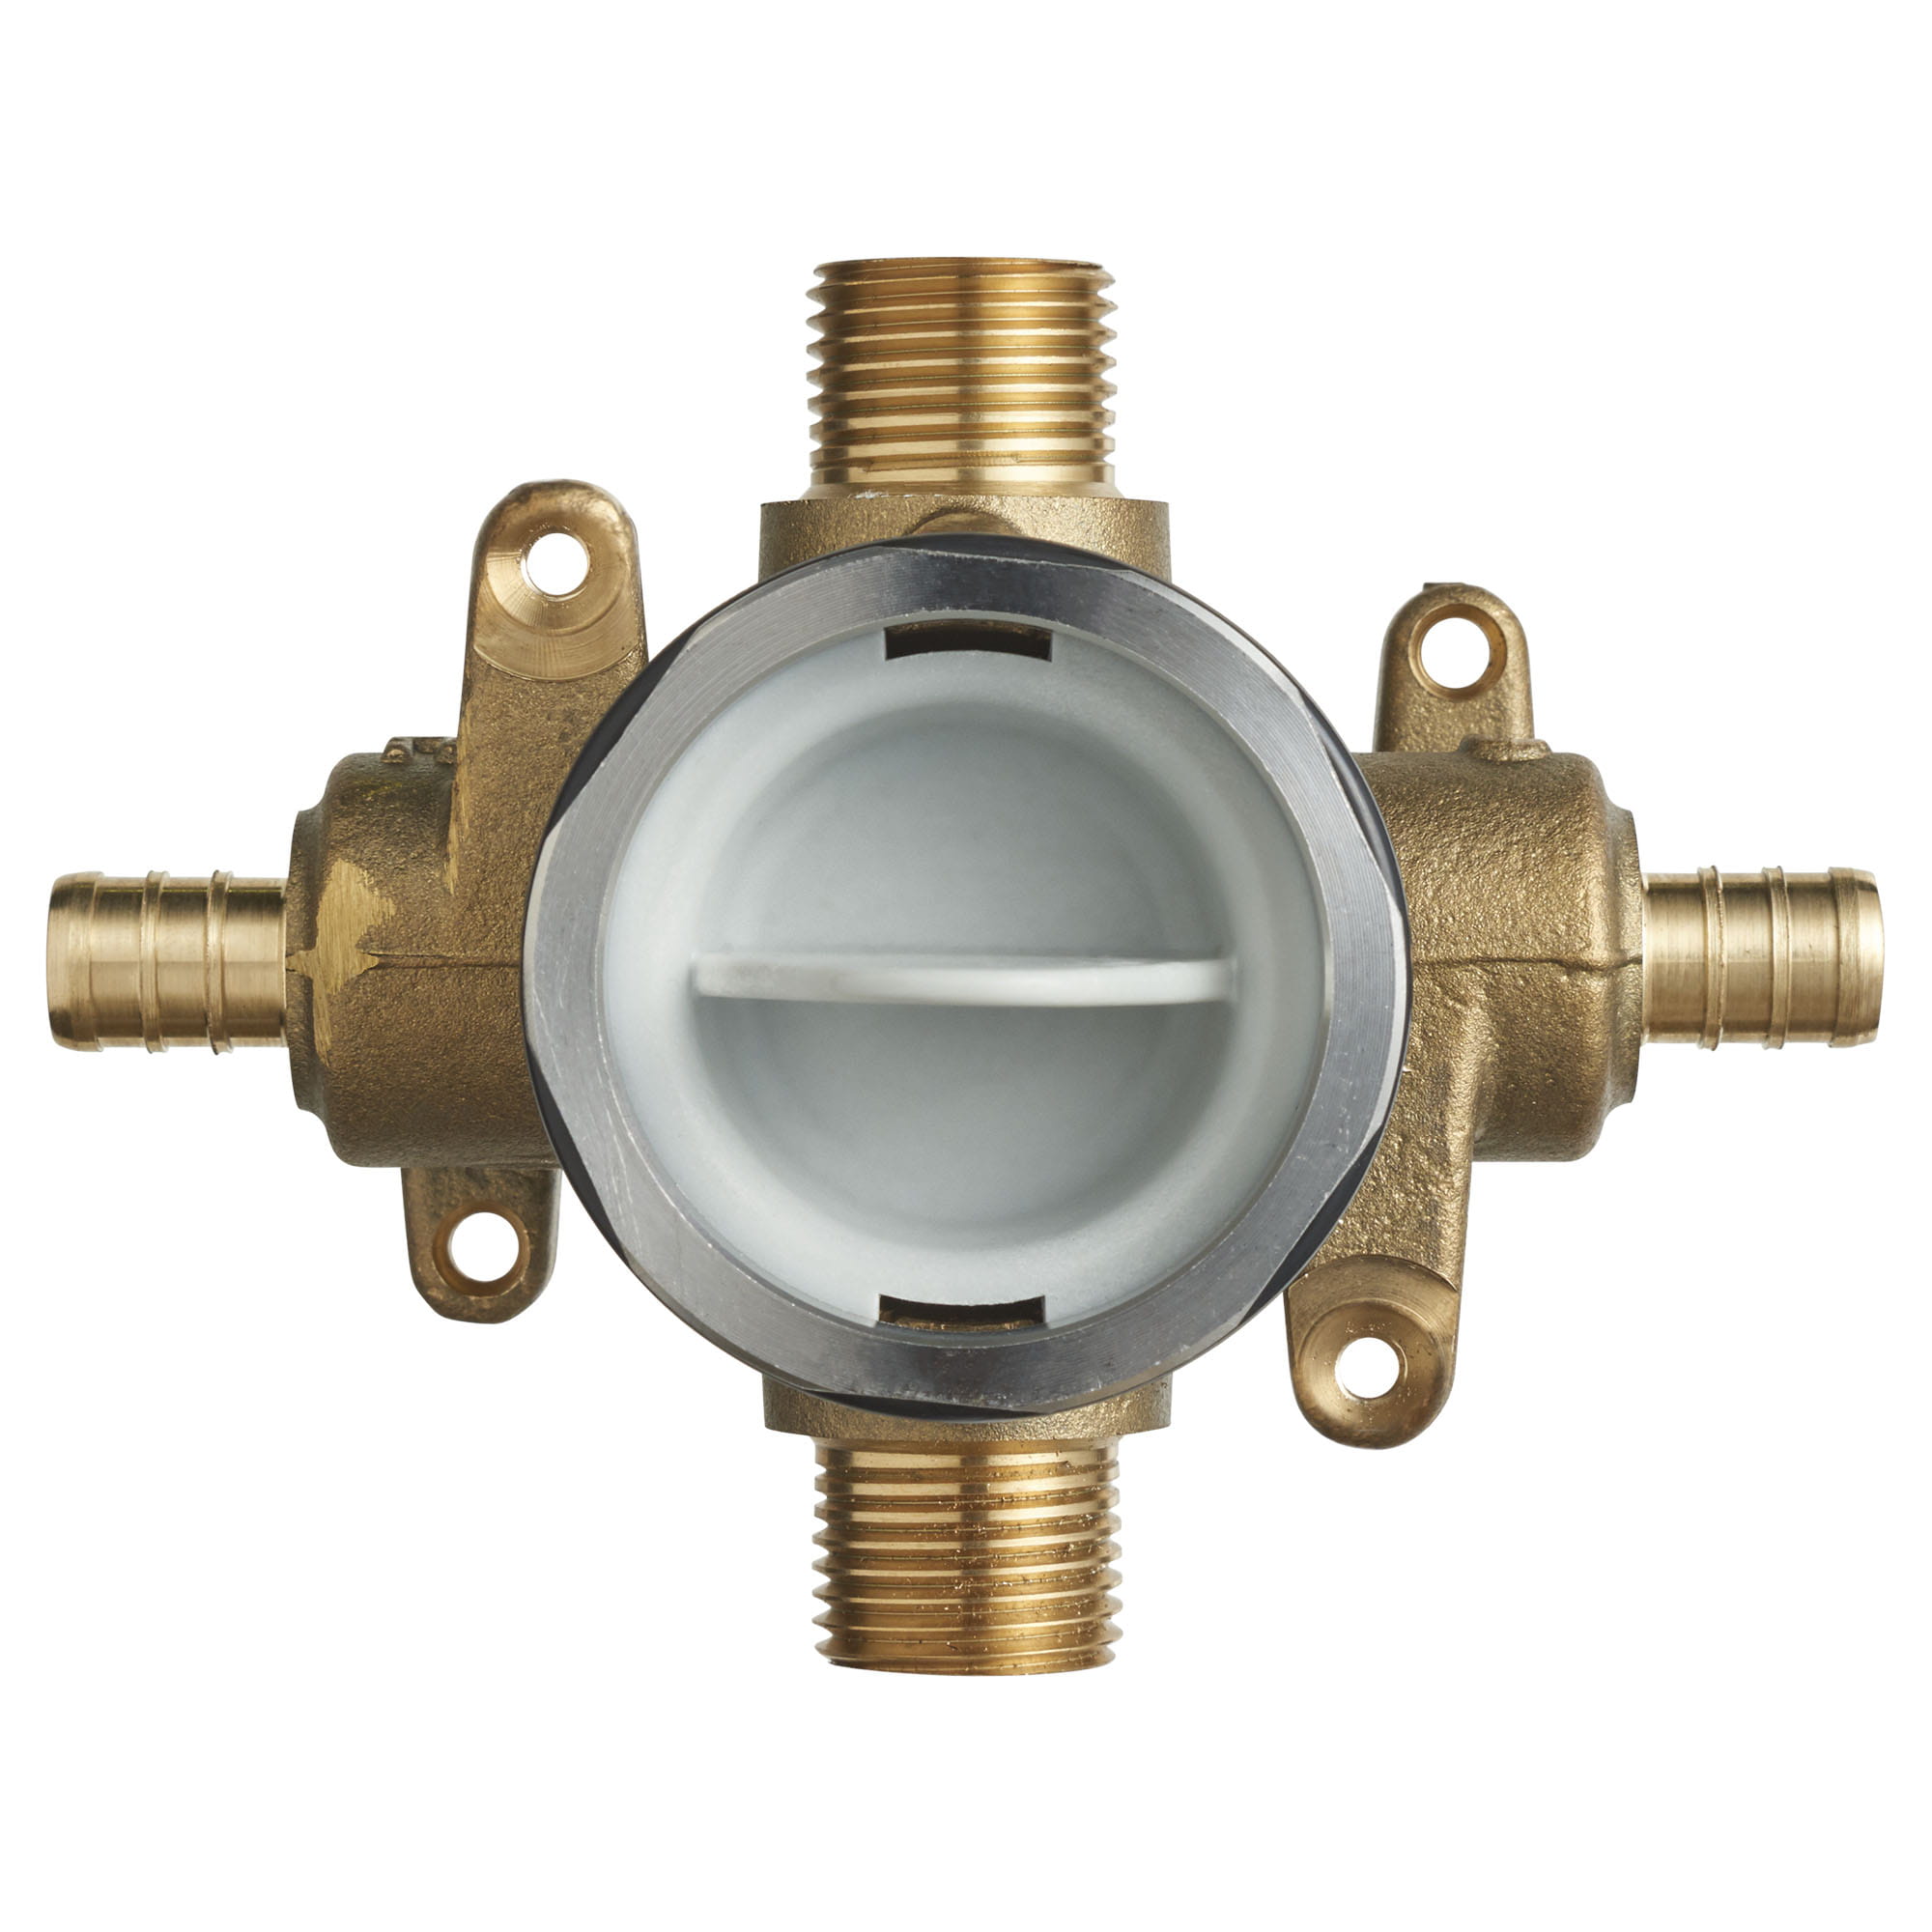 Flash® Shower Rough-In Valve With PEX Inlets/Universal Outlets for Crimp Ring System